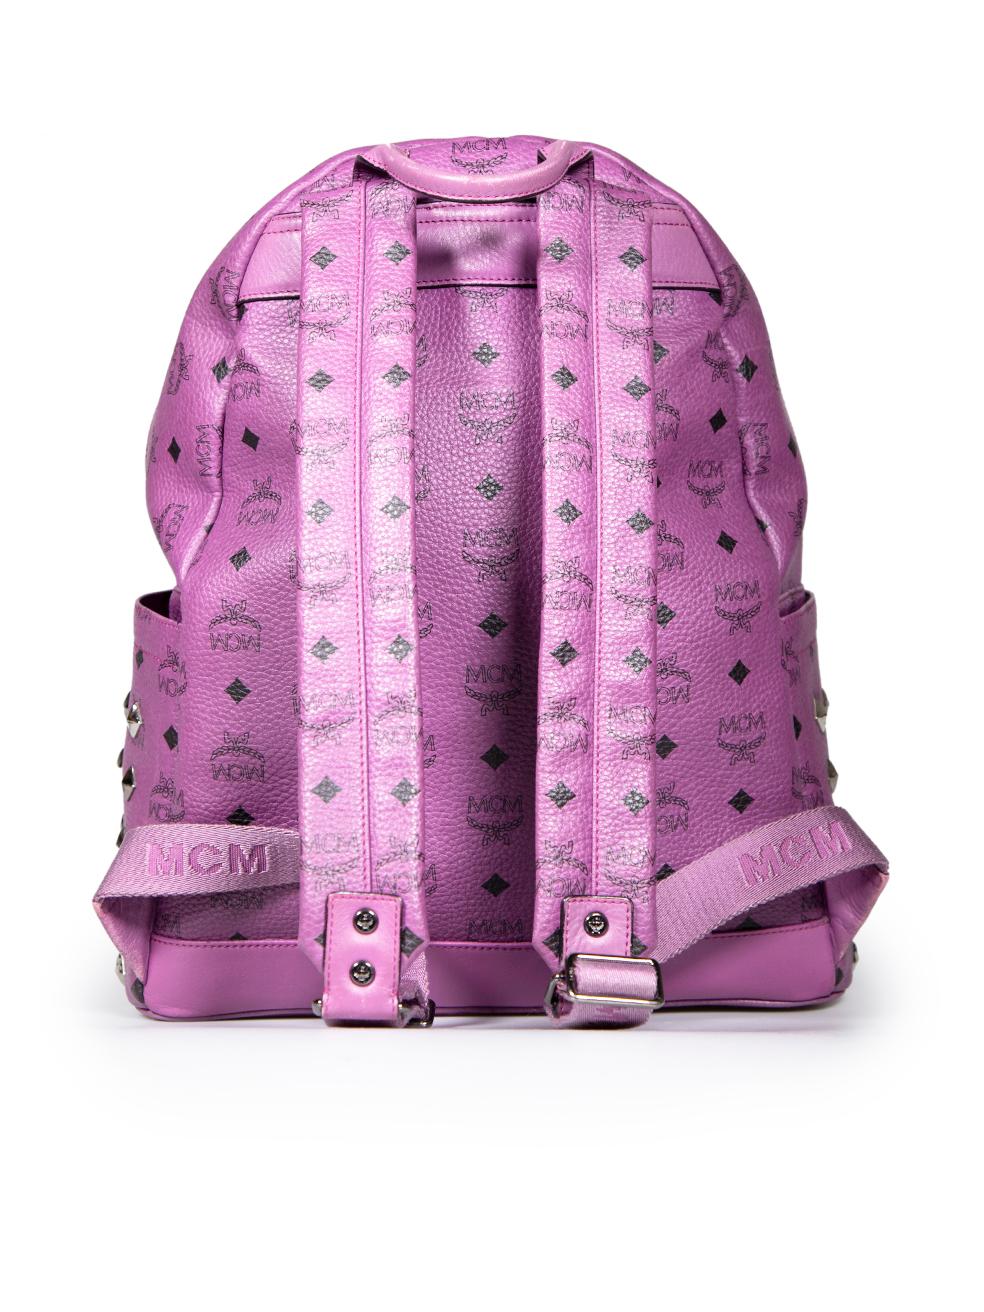 MCM Purple Leather Visetos Stark Studded Backpack In Excellent Condition For Sale In London, GB